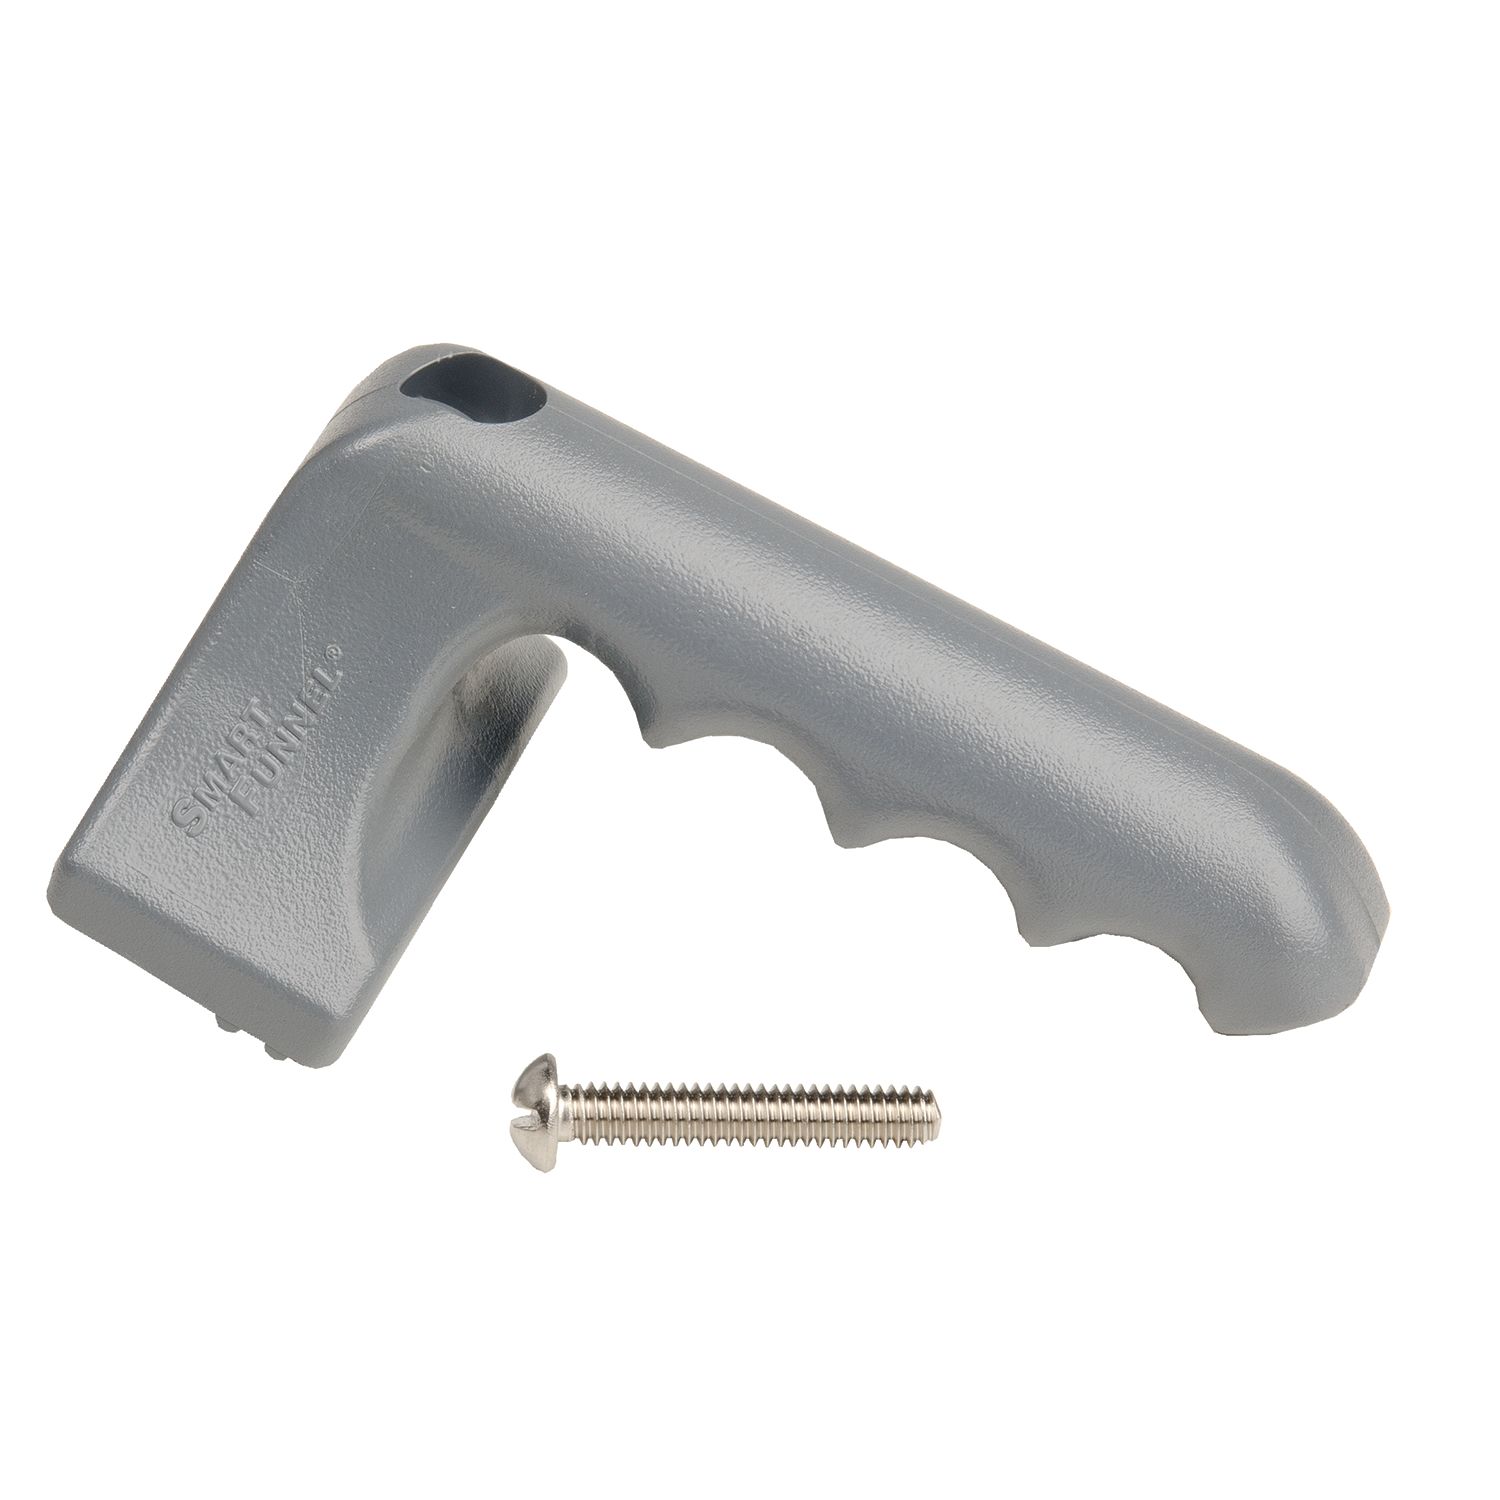 HANDLE ASSY, FUNNEL GRAY - Hardware - BUNN Commercial Site